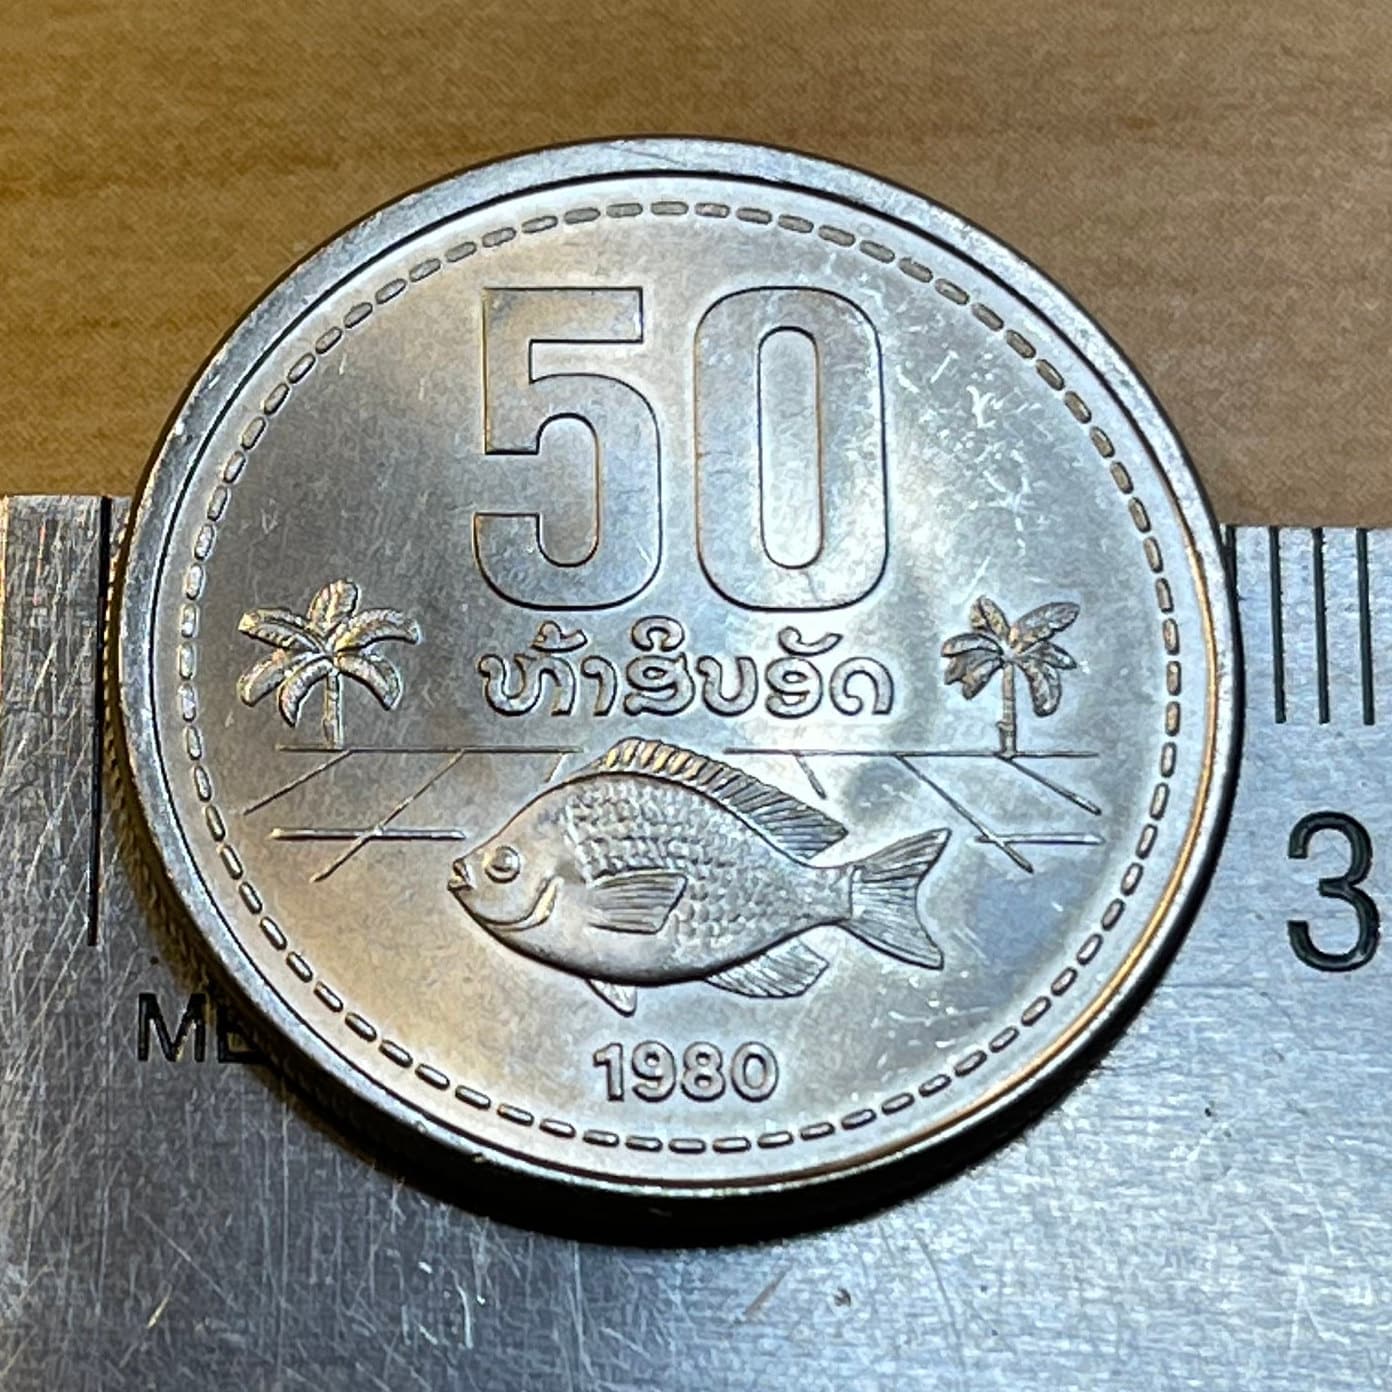 Tilapia Fish 50 Att Laos Authentic Coin Money for Jewelry and Craft Making